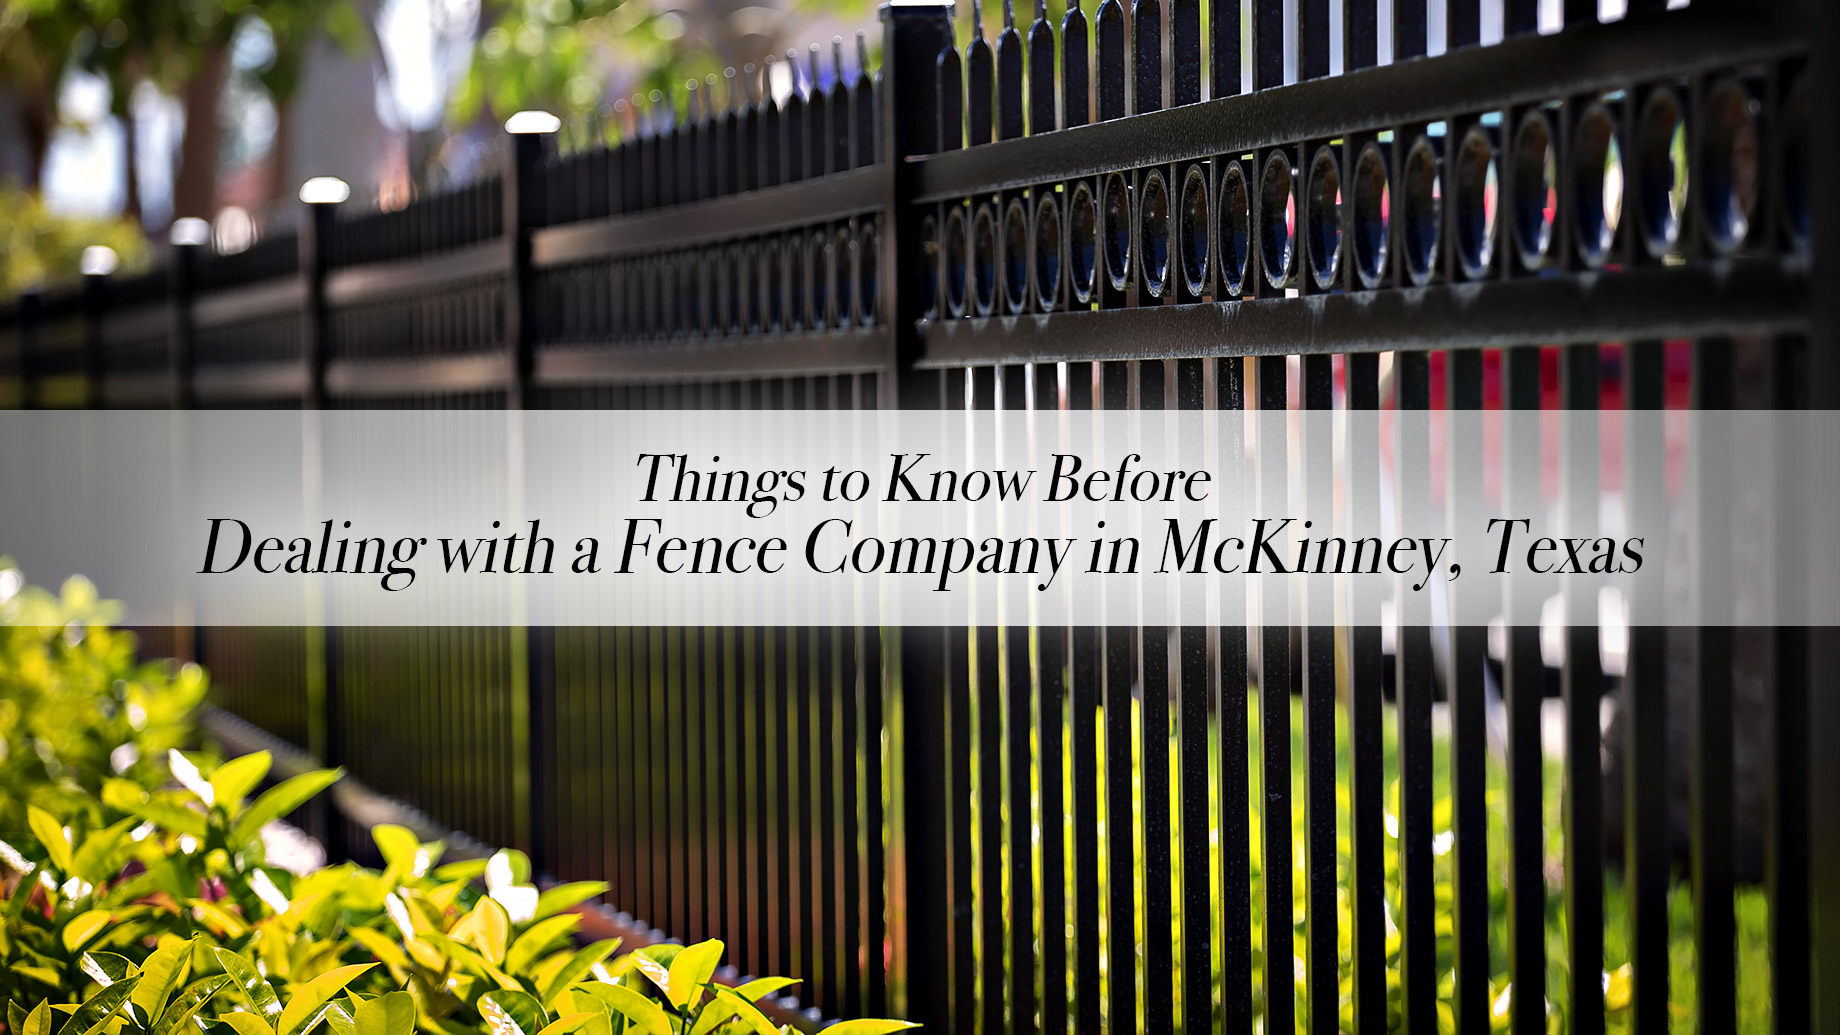 Things to Know Before Dealing with a Fence Company in McKinney, Texas